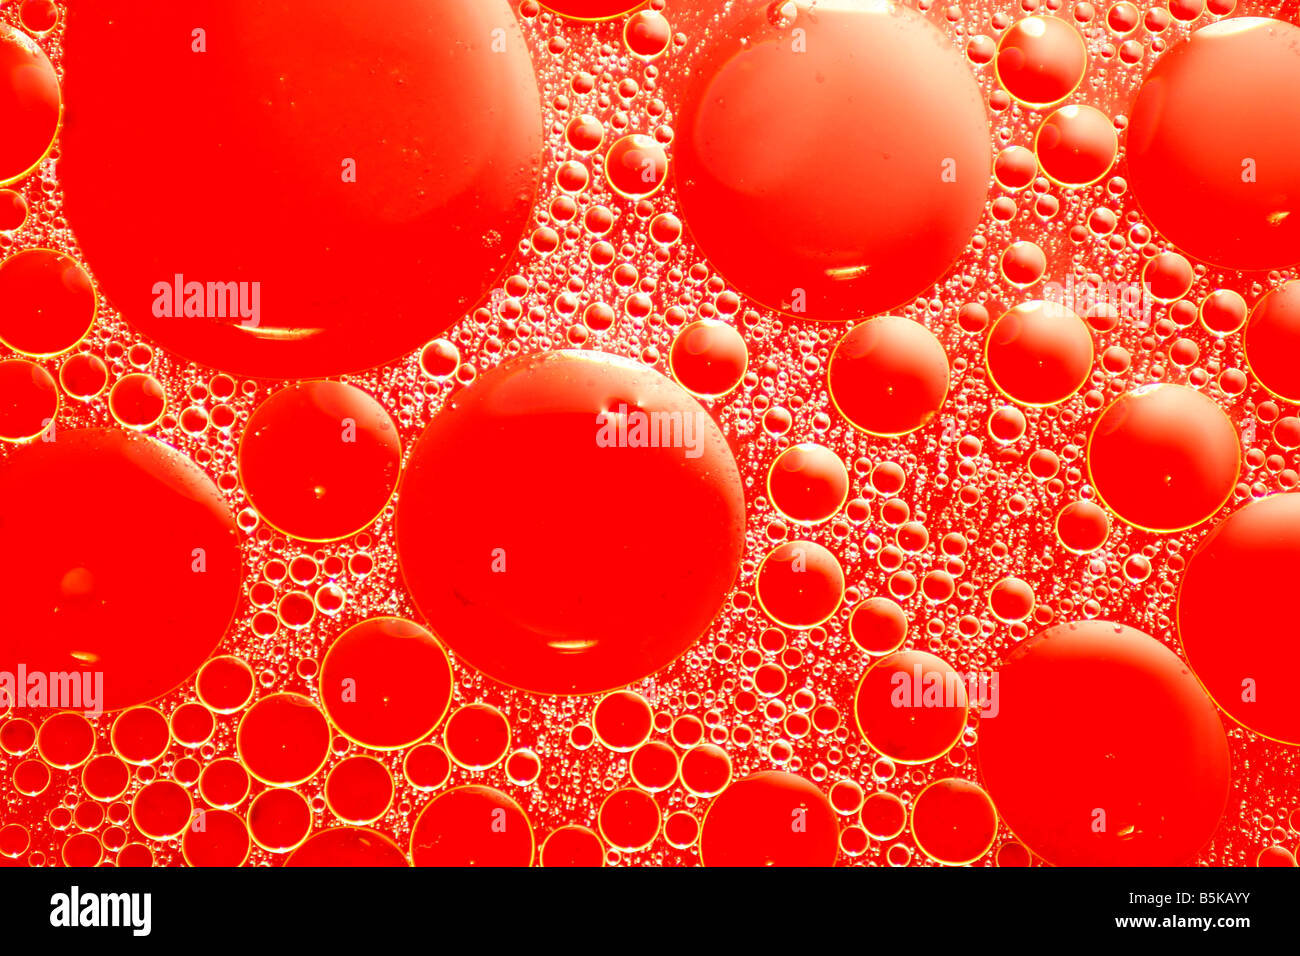 Abstract red looking oil and water bubbles of various sizes Stock Photo